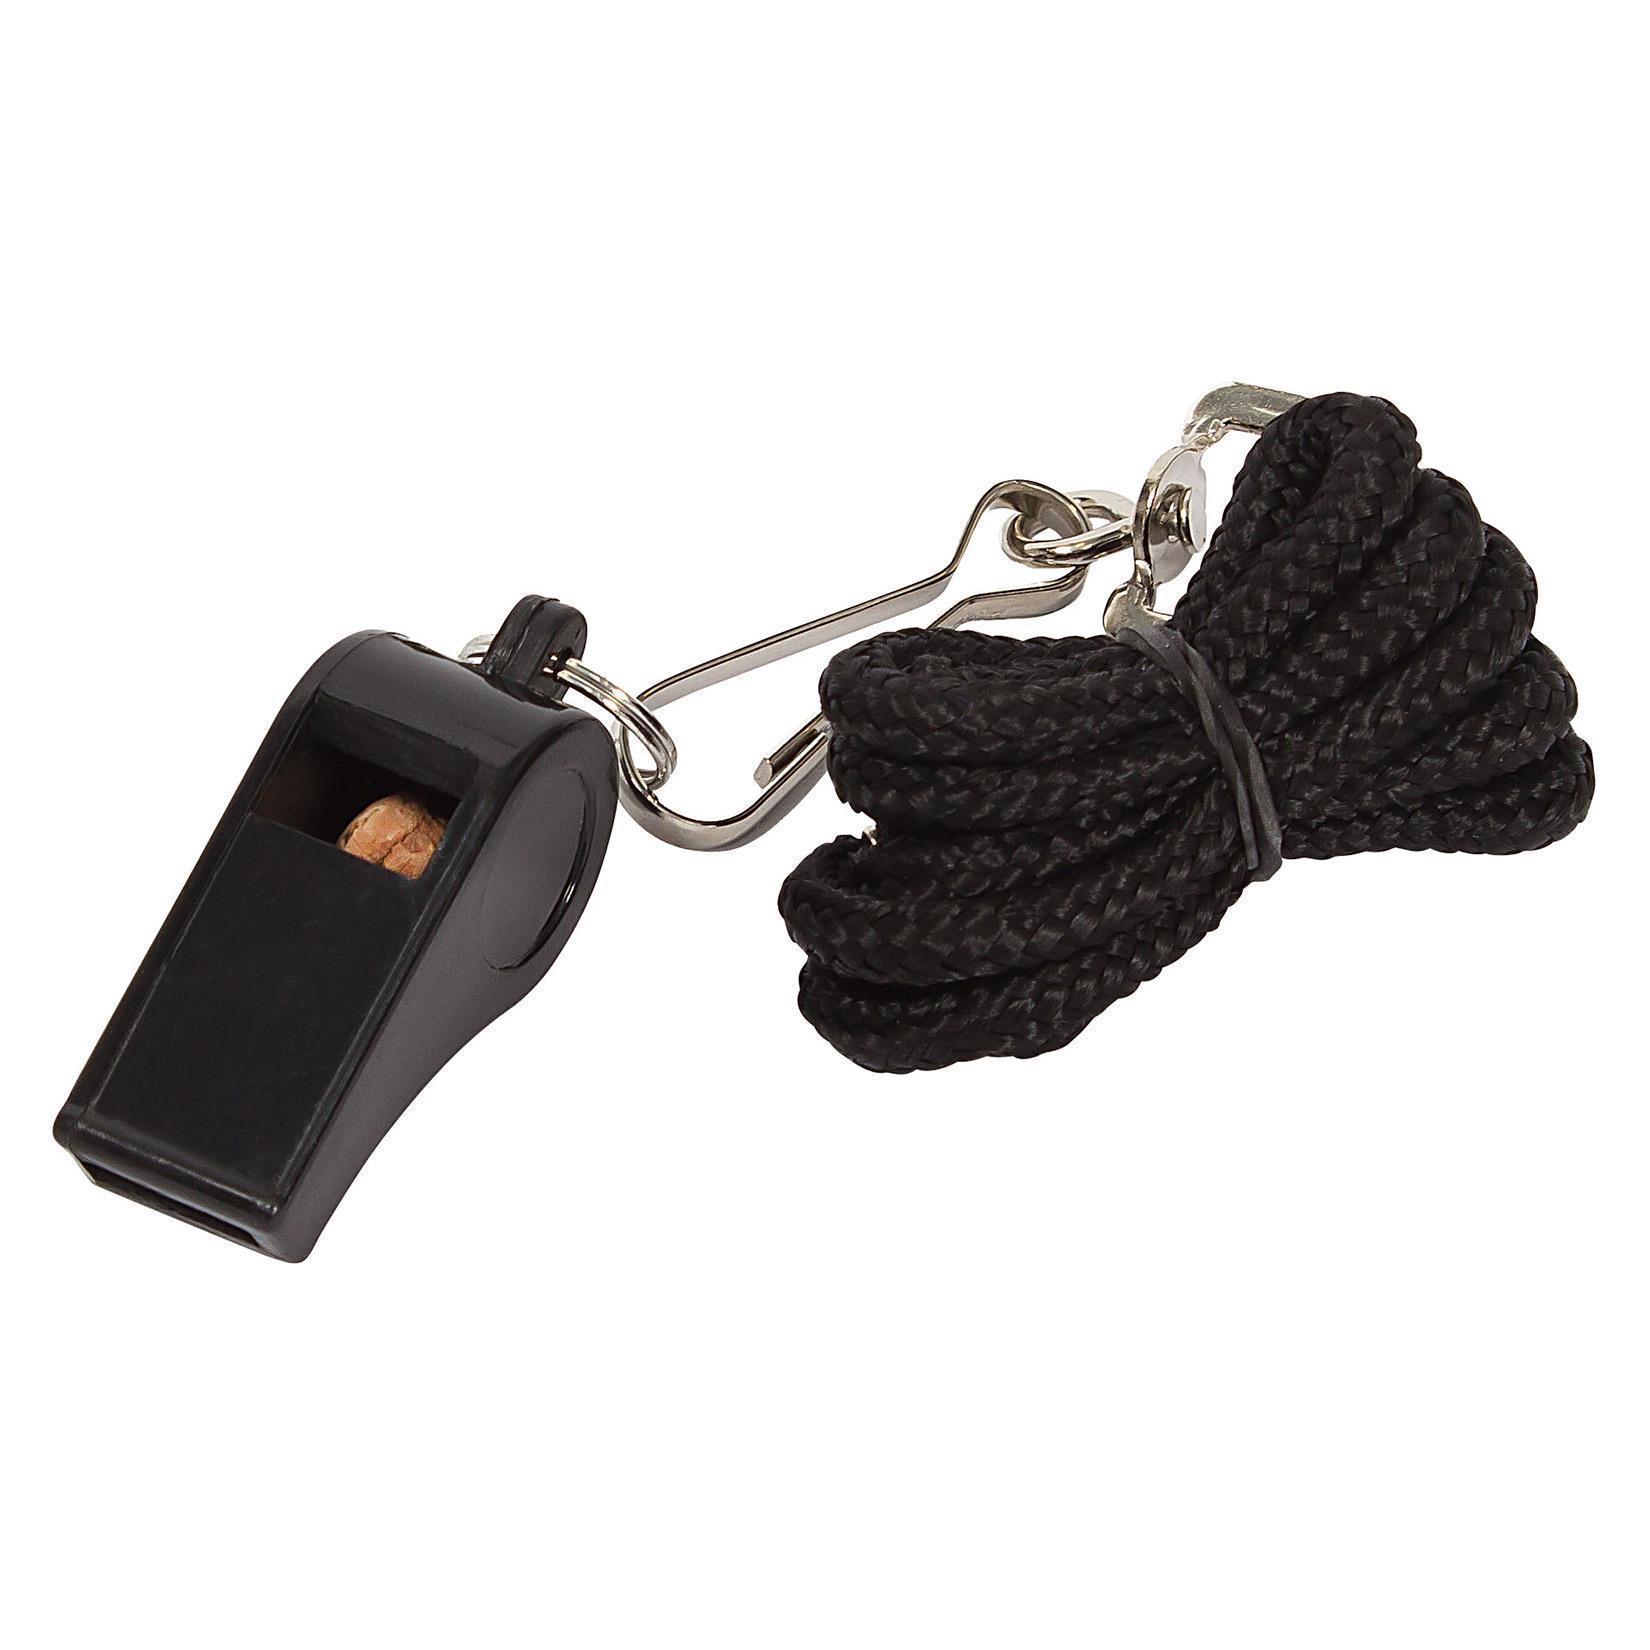 Stanno Referee Whistle + Lanyard